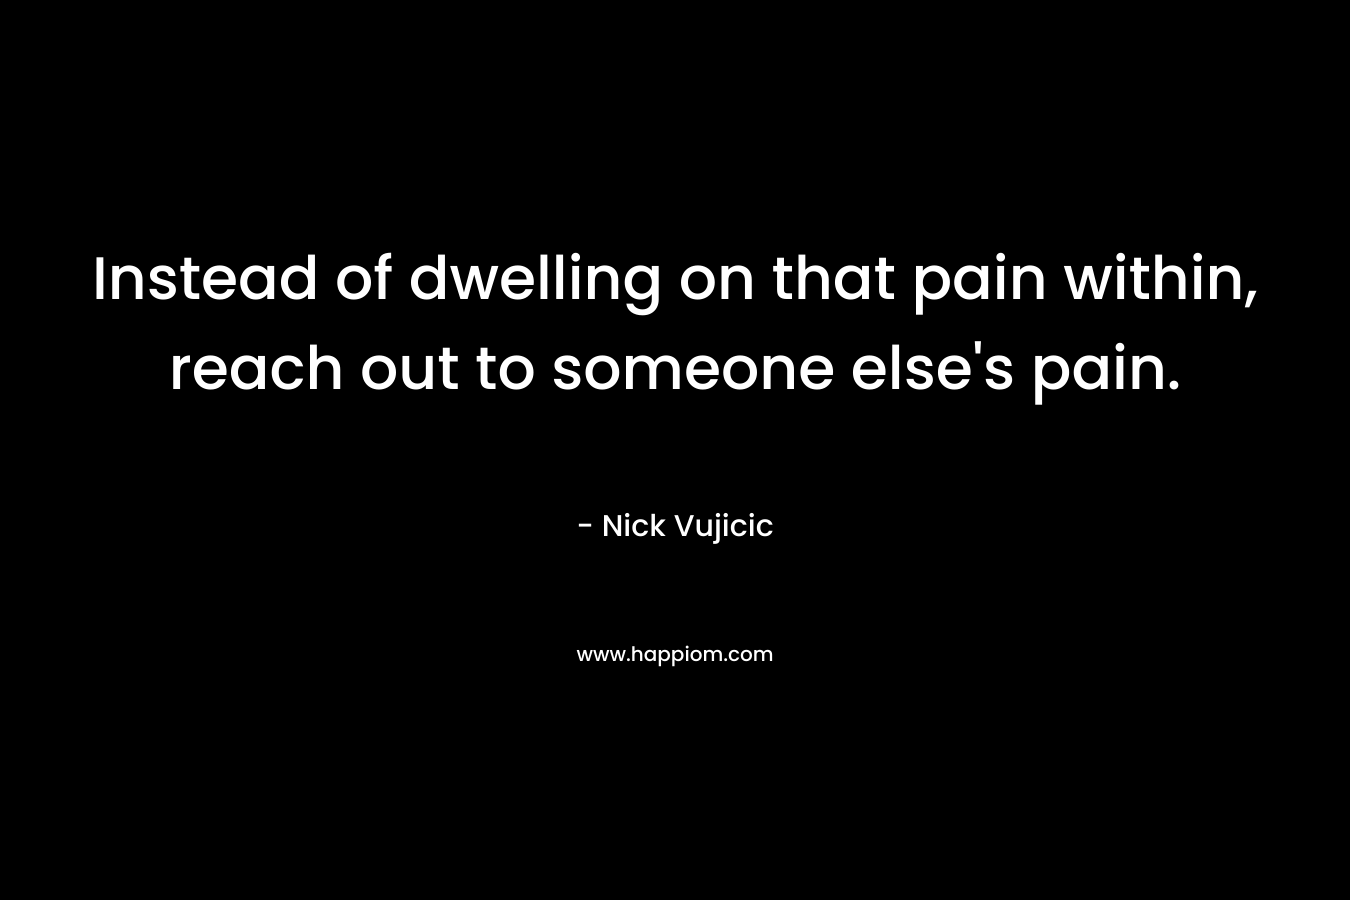 Instead of dwelling on that pain within, reach out to someone else's pain.